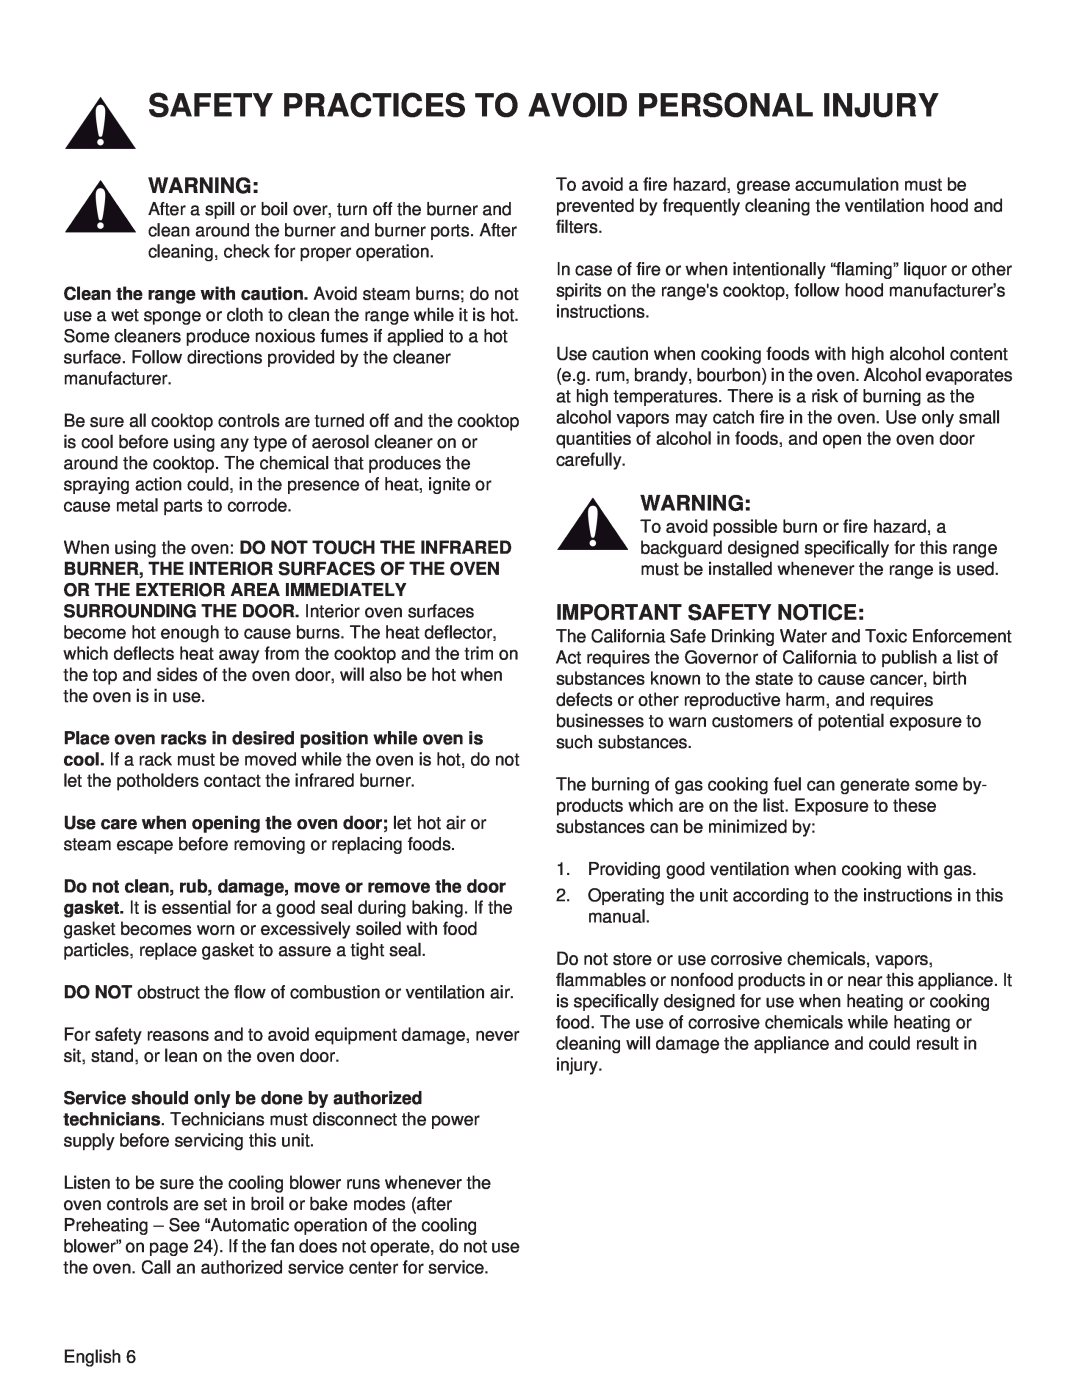 Thermador PRG30, PRL36, PRG48, PRL30, PRG36, PRL48 manual Important Safety Notice, Safety Practices To Avoid Personal Injury 